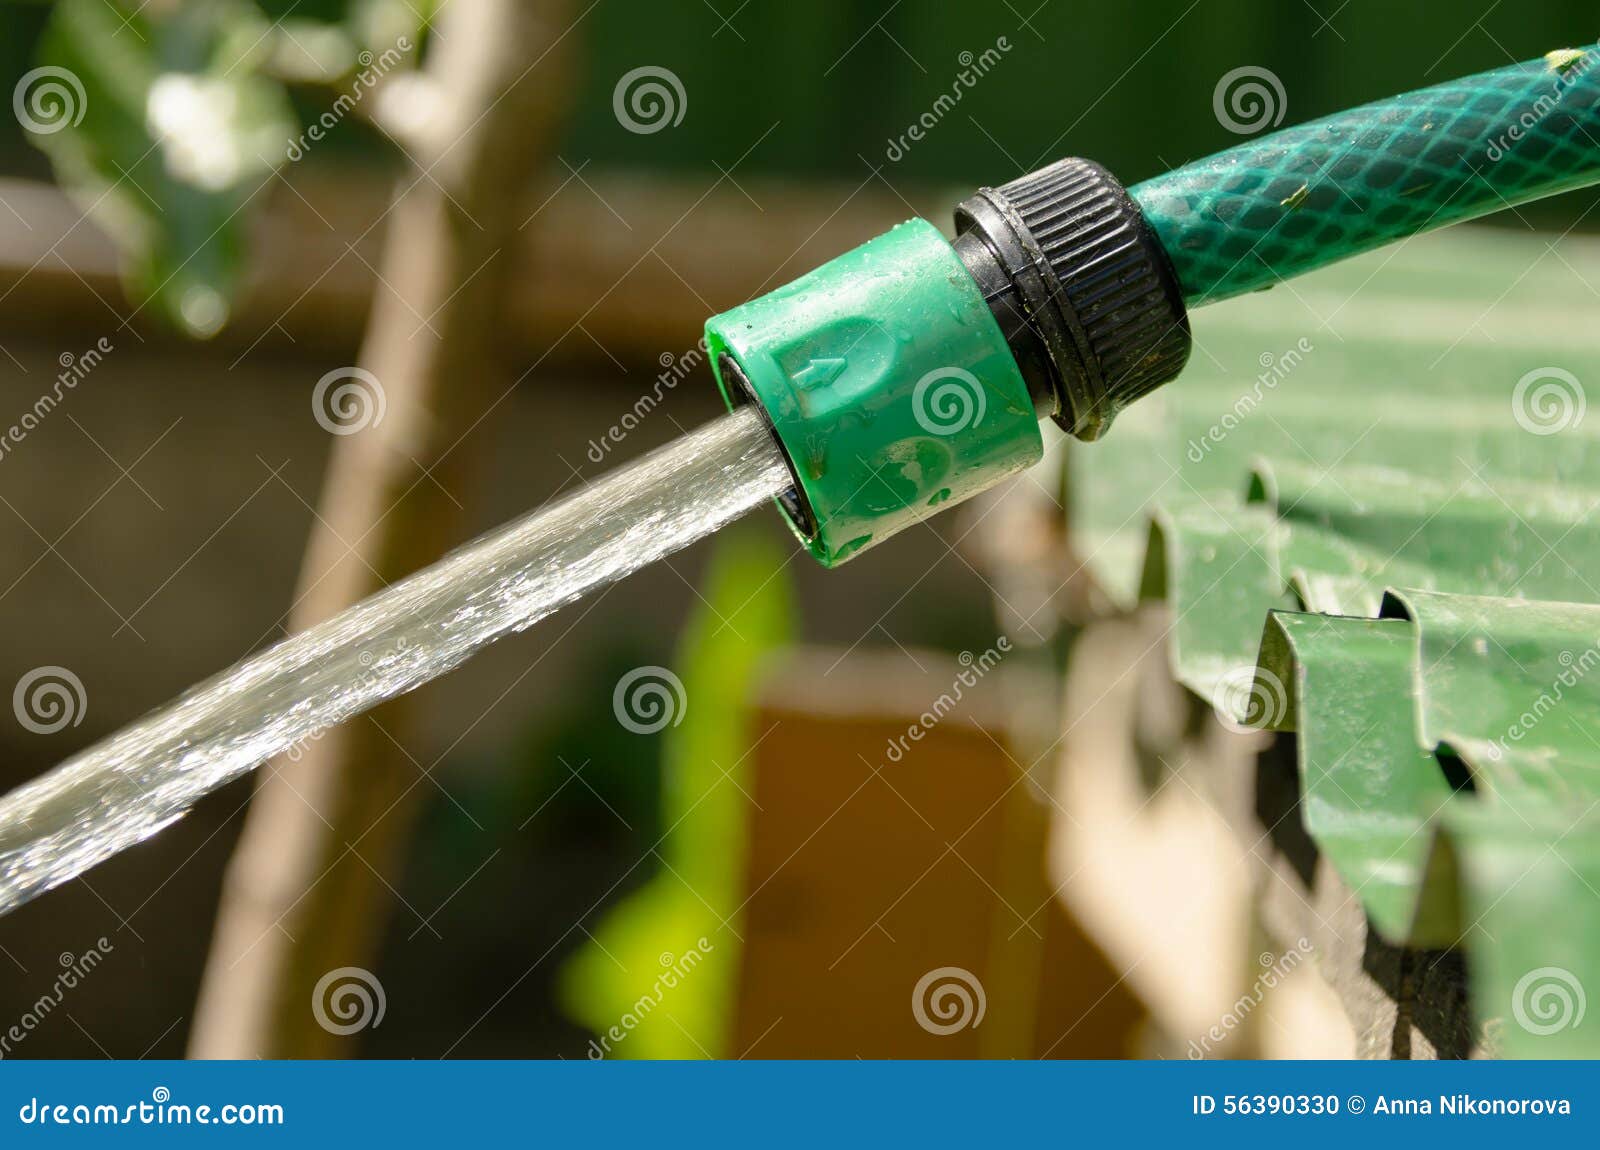 Garden Hose, The Water Pressure Stock Photo - Image of cultivated